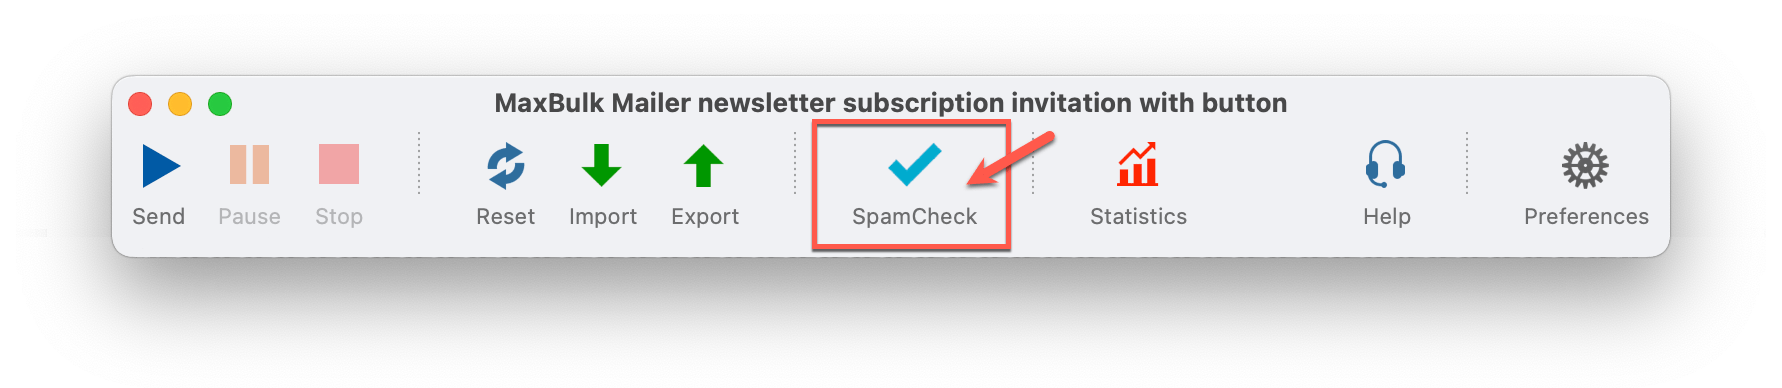 how to send mass email without going to spam